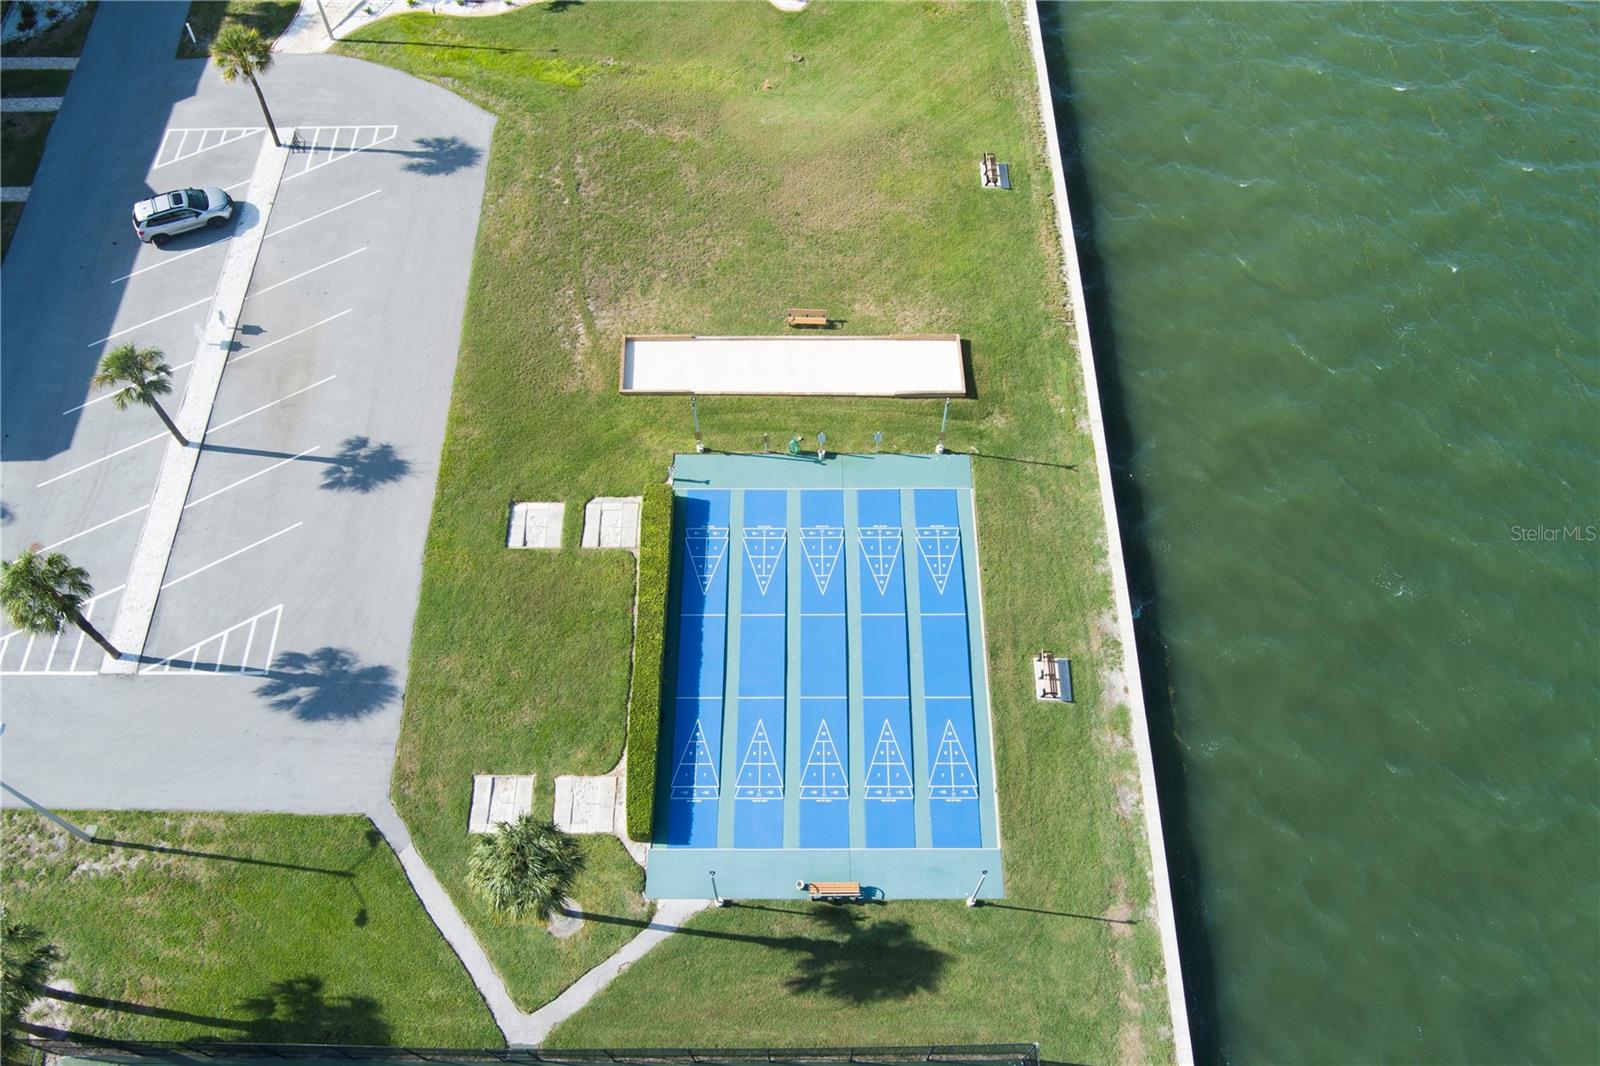 Royal Stewart Arms is a 55+ Condo Community featuring heated pool, Tennis courts, Shuffleboard, Pickleball, community center, sauna, fishing pier, and so much more! Located on the beautiful Dunedin Causeway just before Honeymoon State Park & Beaches.